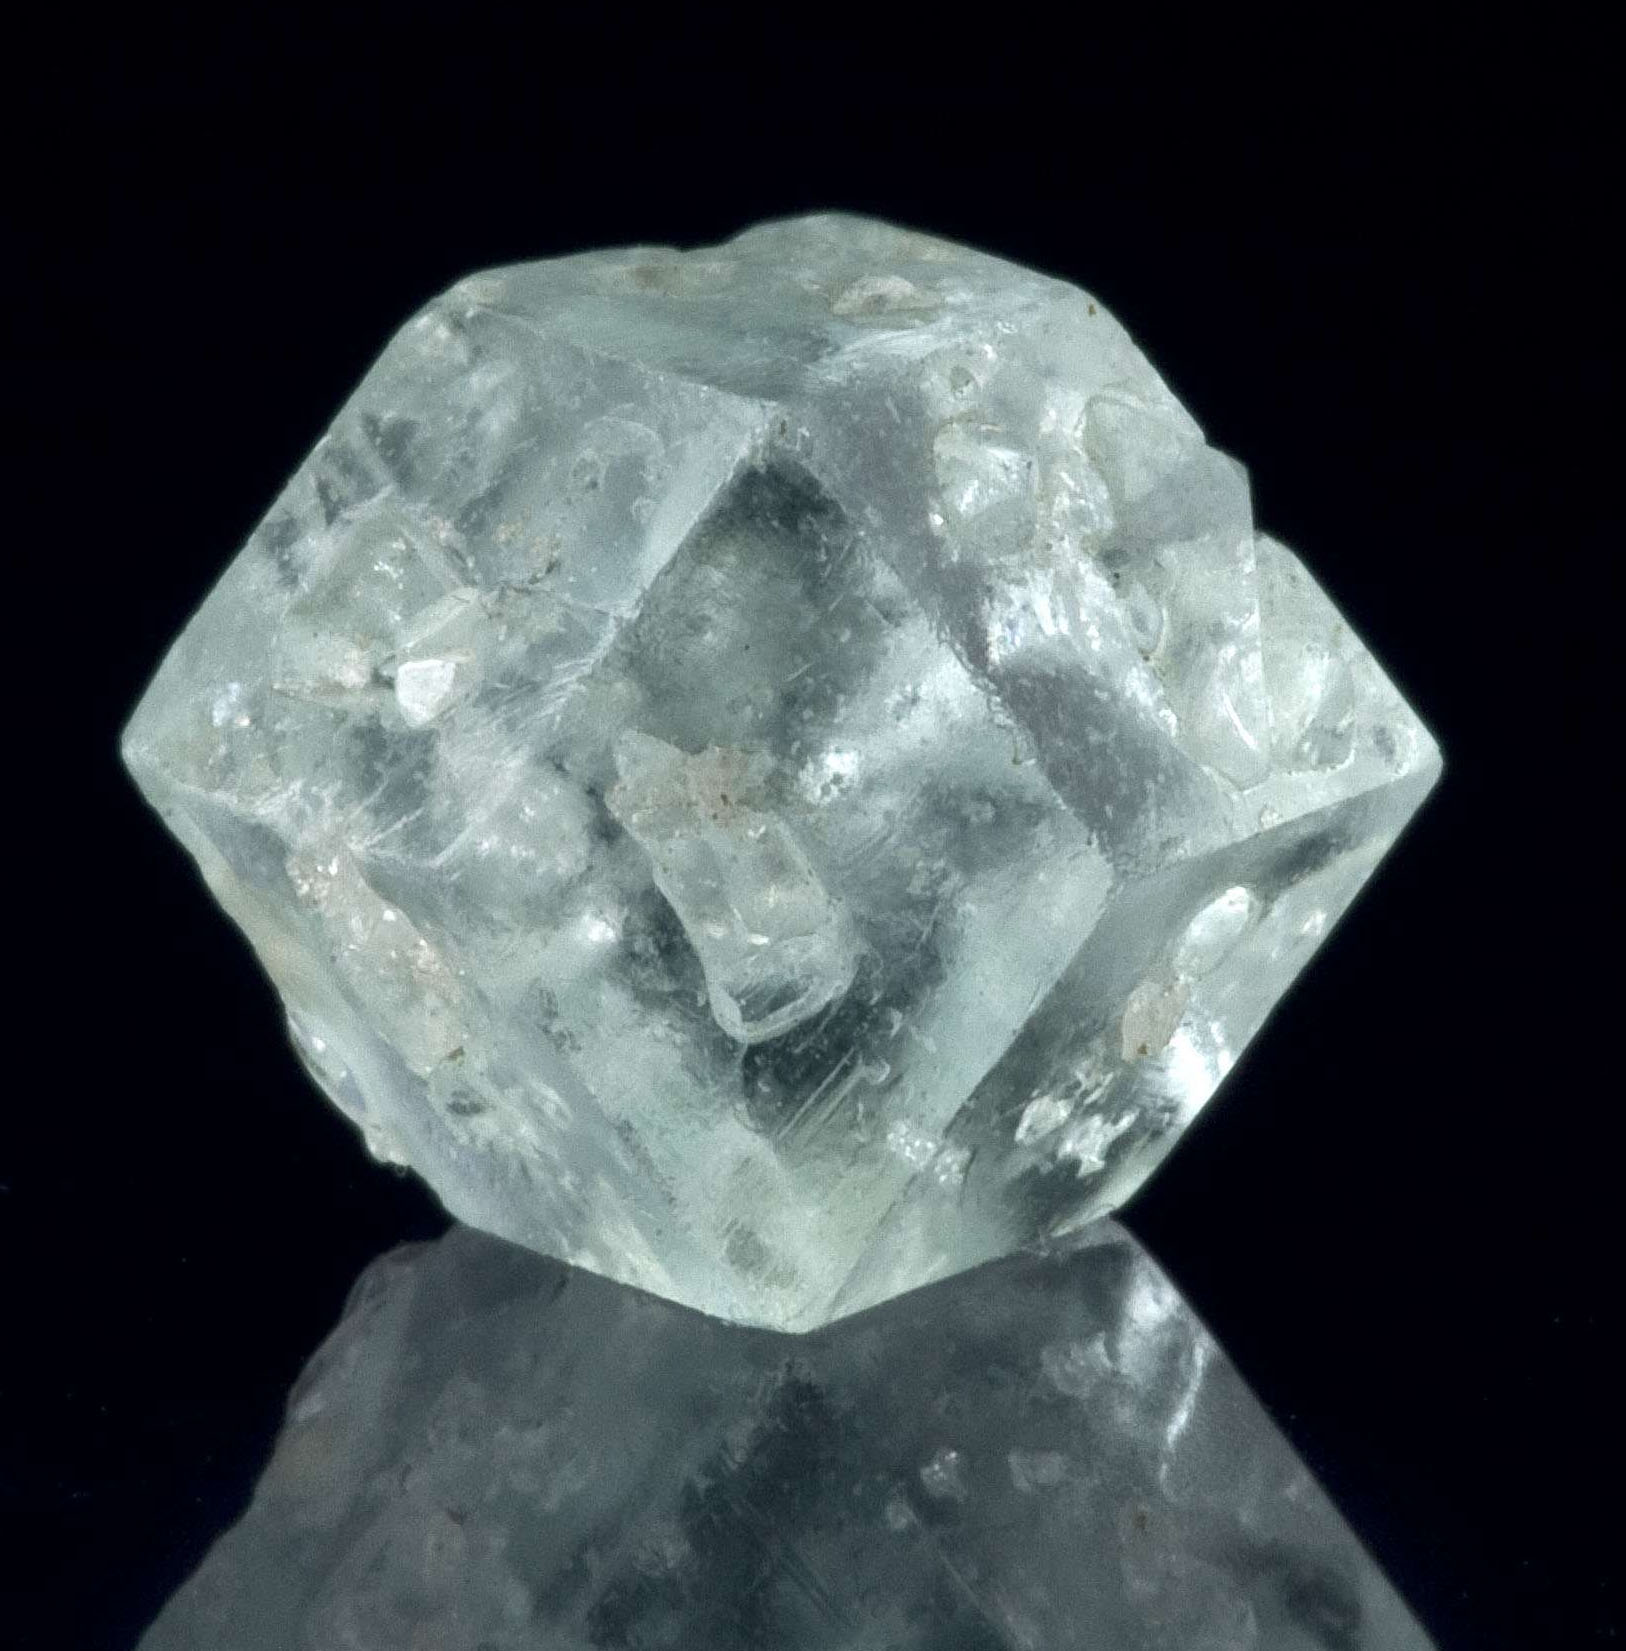 Boracite Dodecahedral Crystal from Kalkberg hill, Luneburg, Lower Saxony, Germany